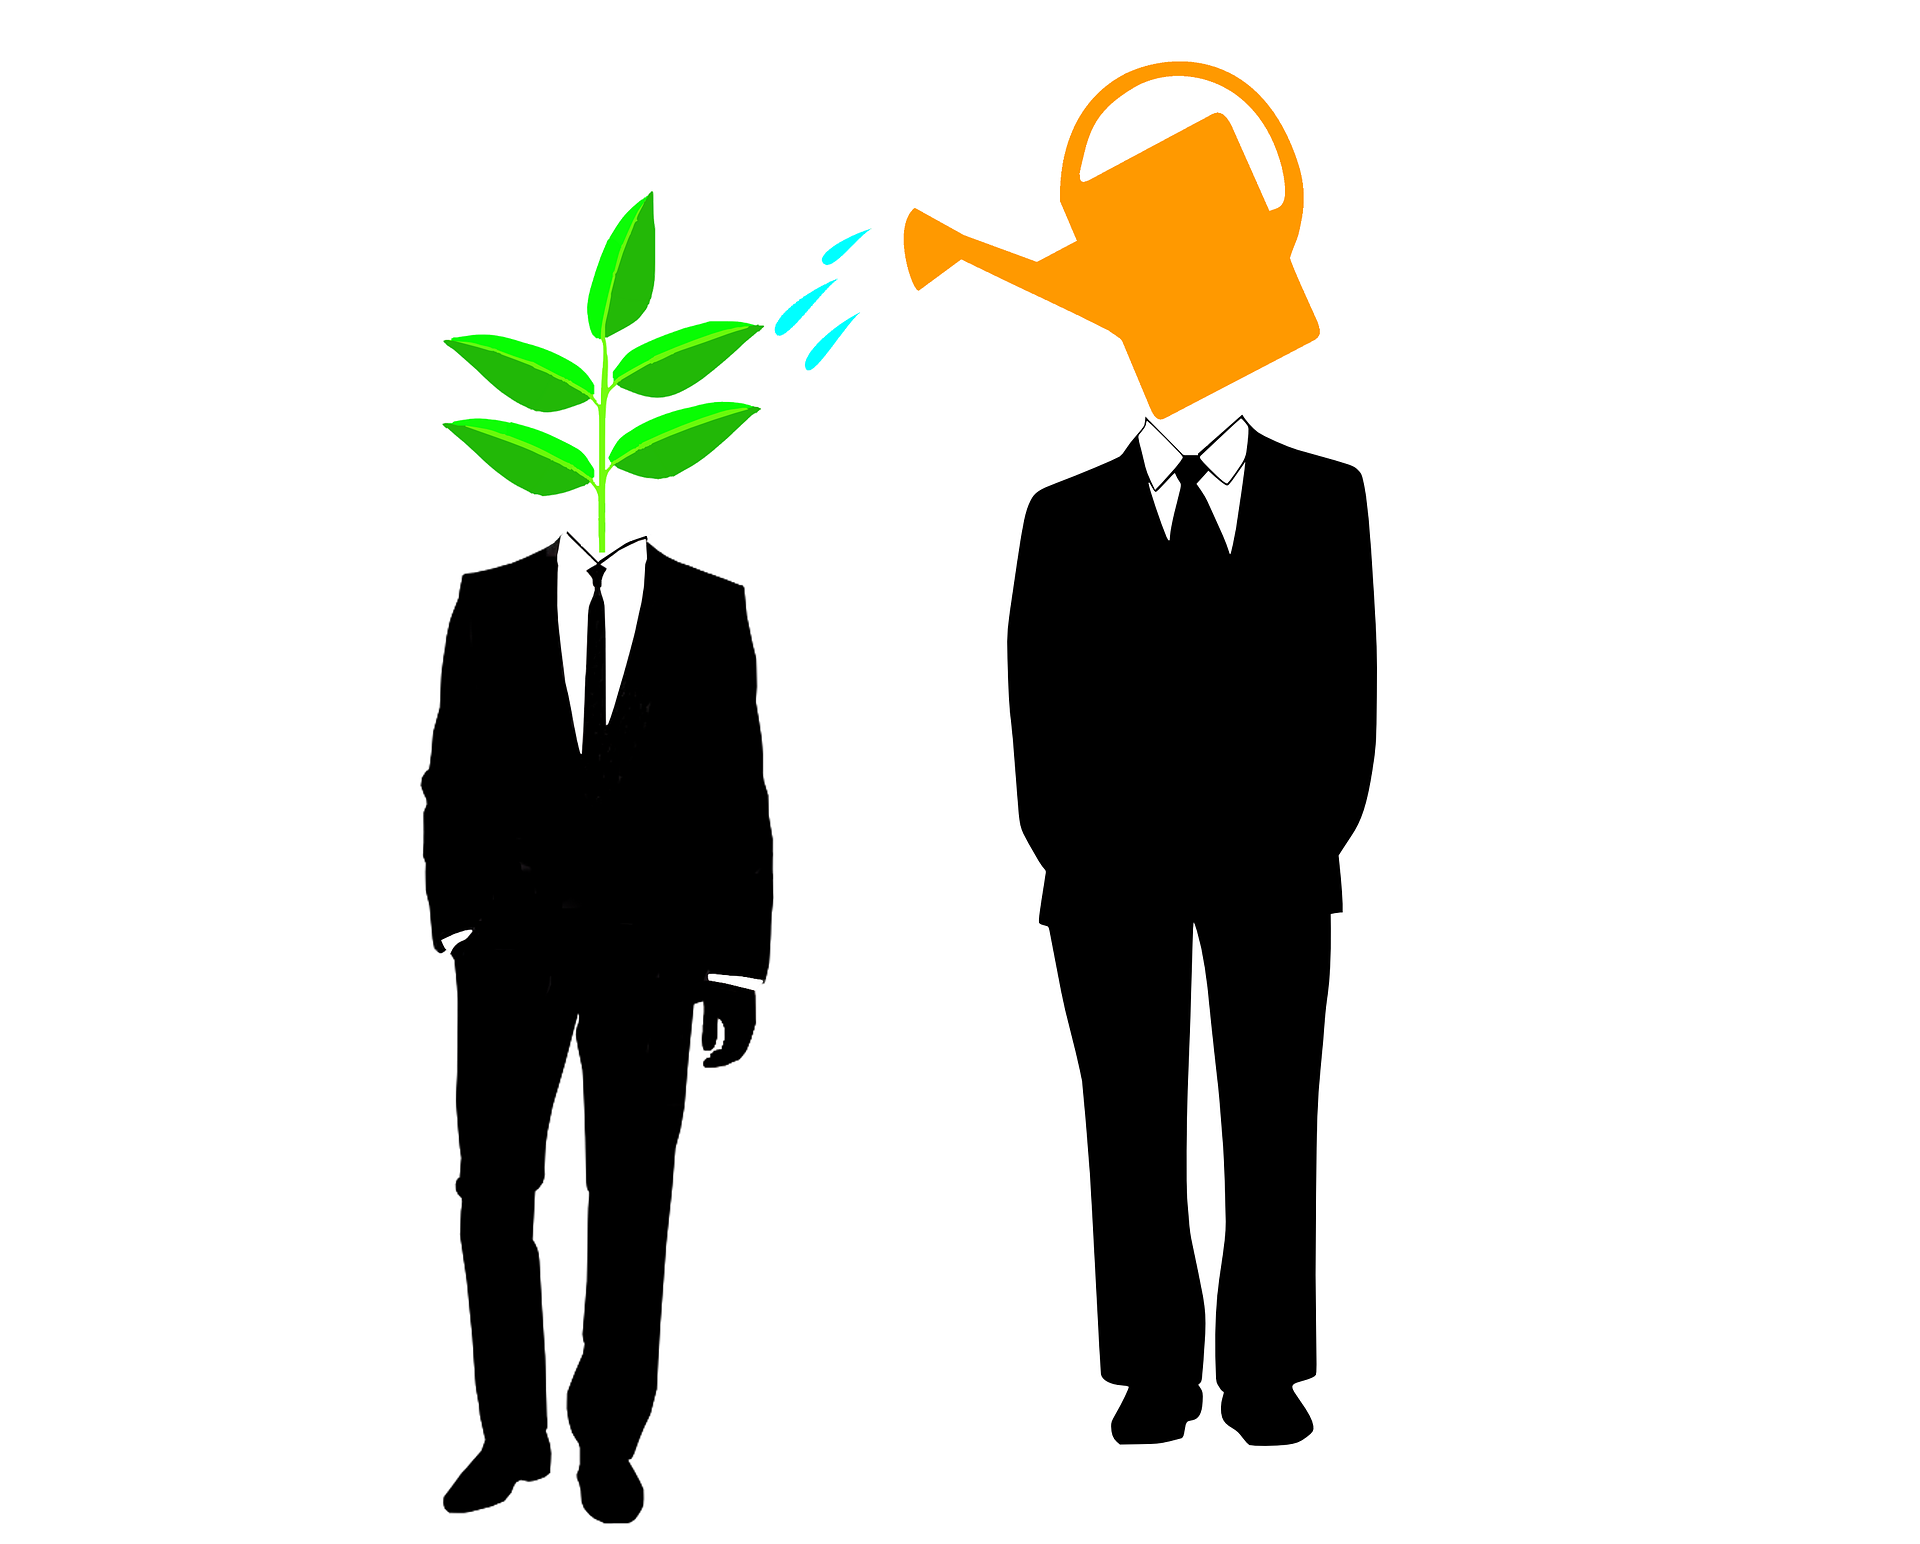 A cartoon image of two men walking in suits. One person's head is a bucket of water, watering the other person's head which is a plant growing. It symbolizes a mentor and a mentee